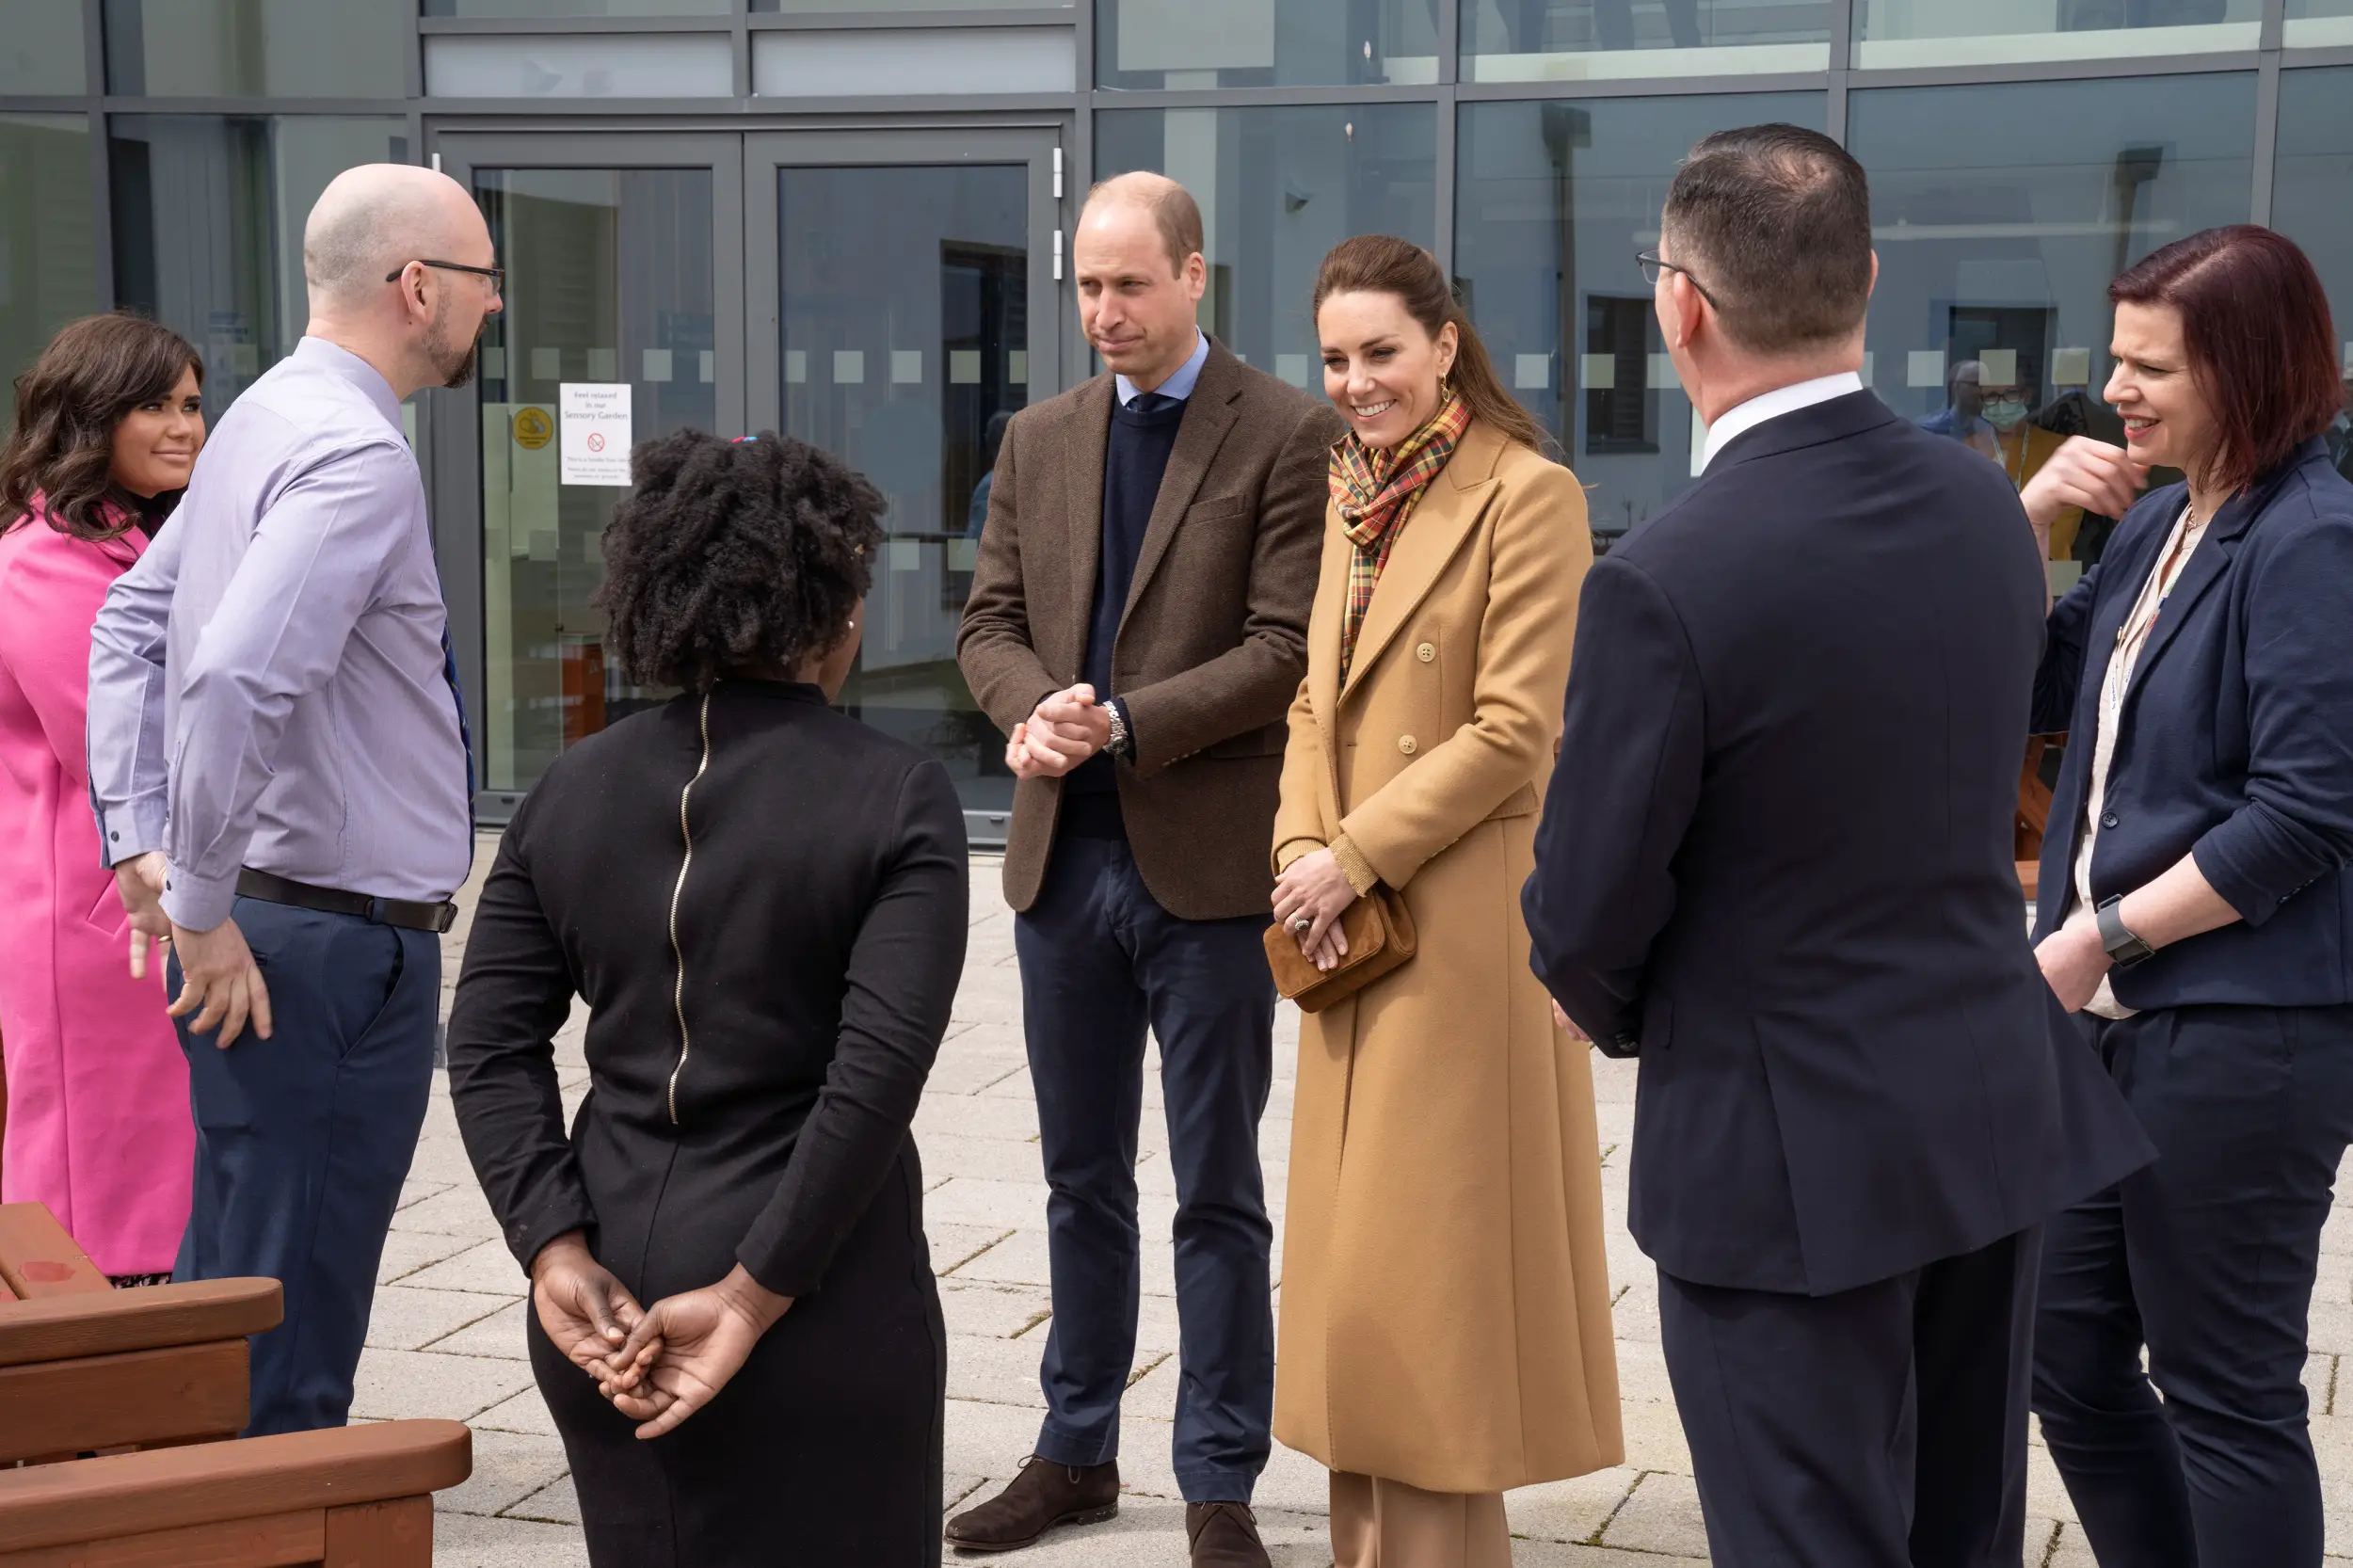 The Duke and Duchess of Cambridge officially opened The £65 million NHS Balfour Hospital in Kirkwall